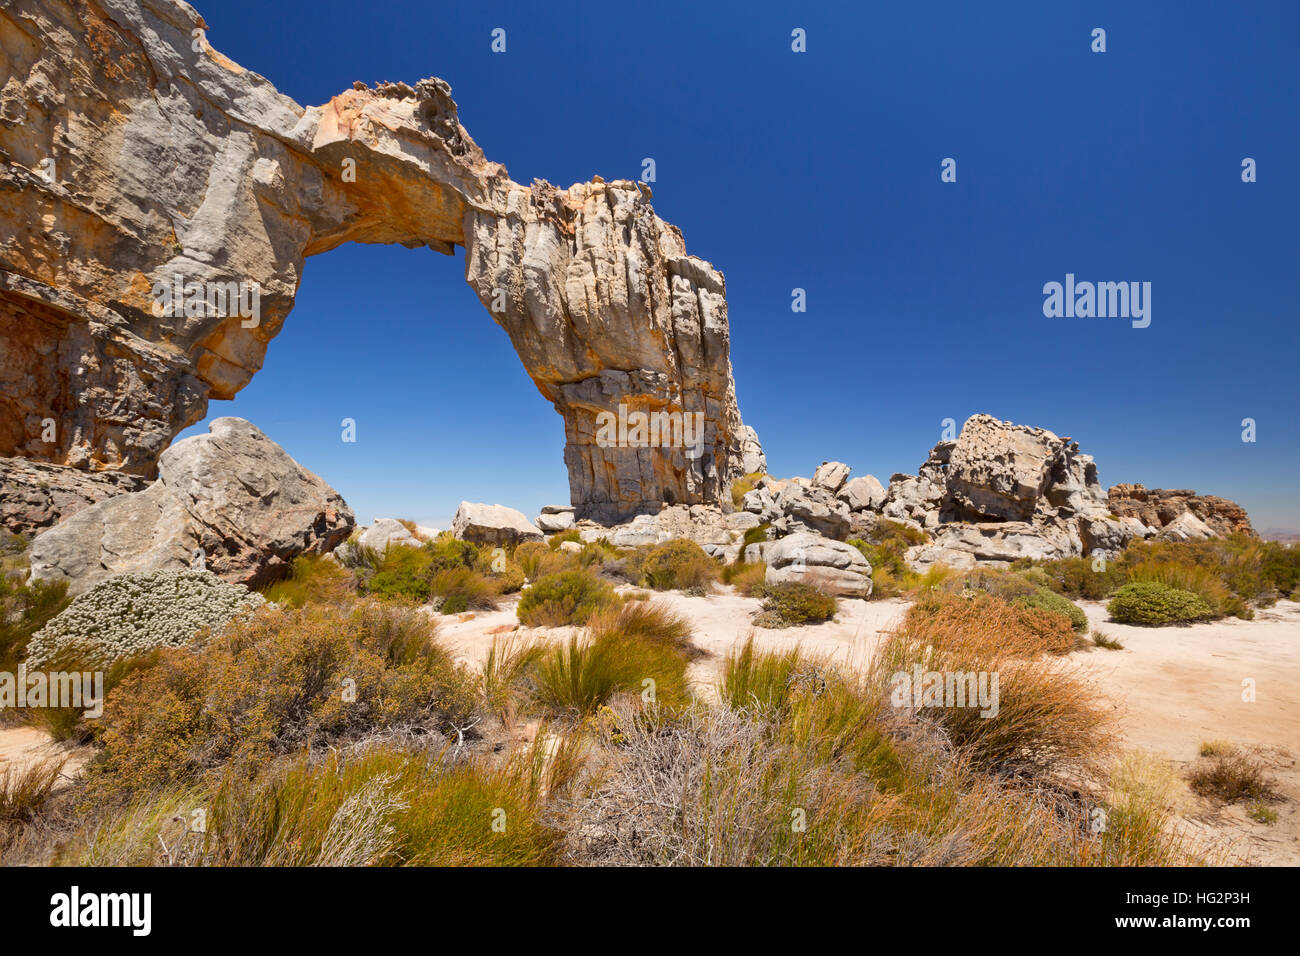 The remote Wolfsberg Arch in the Cederberg Wilderness in South Africa. Stock Photo